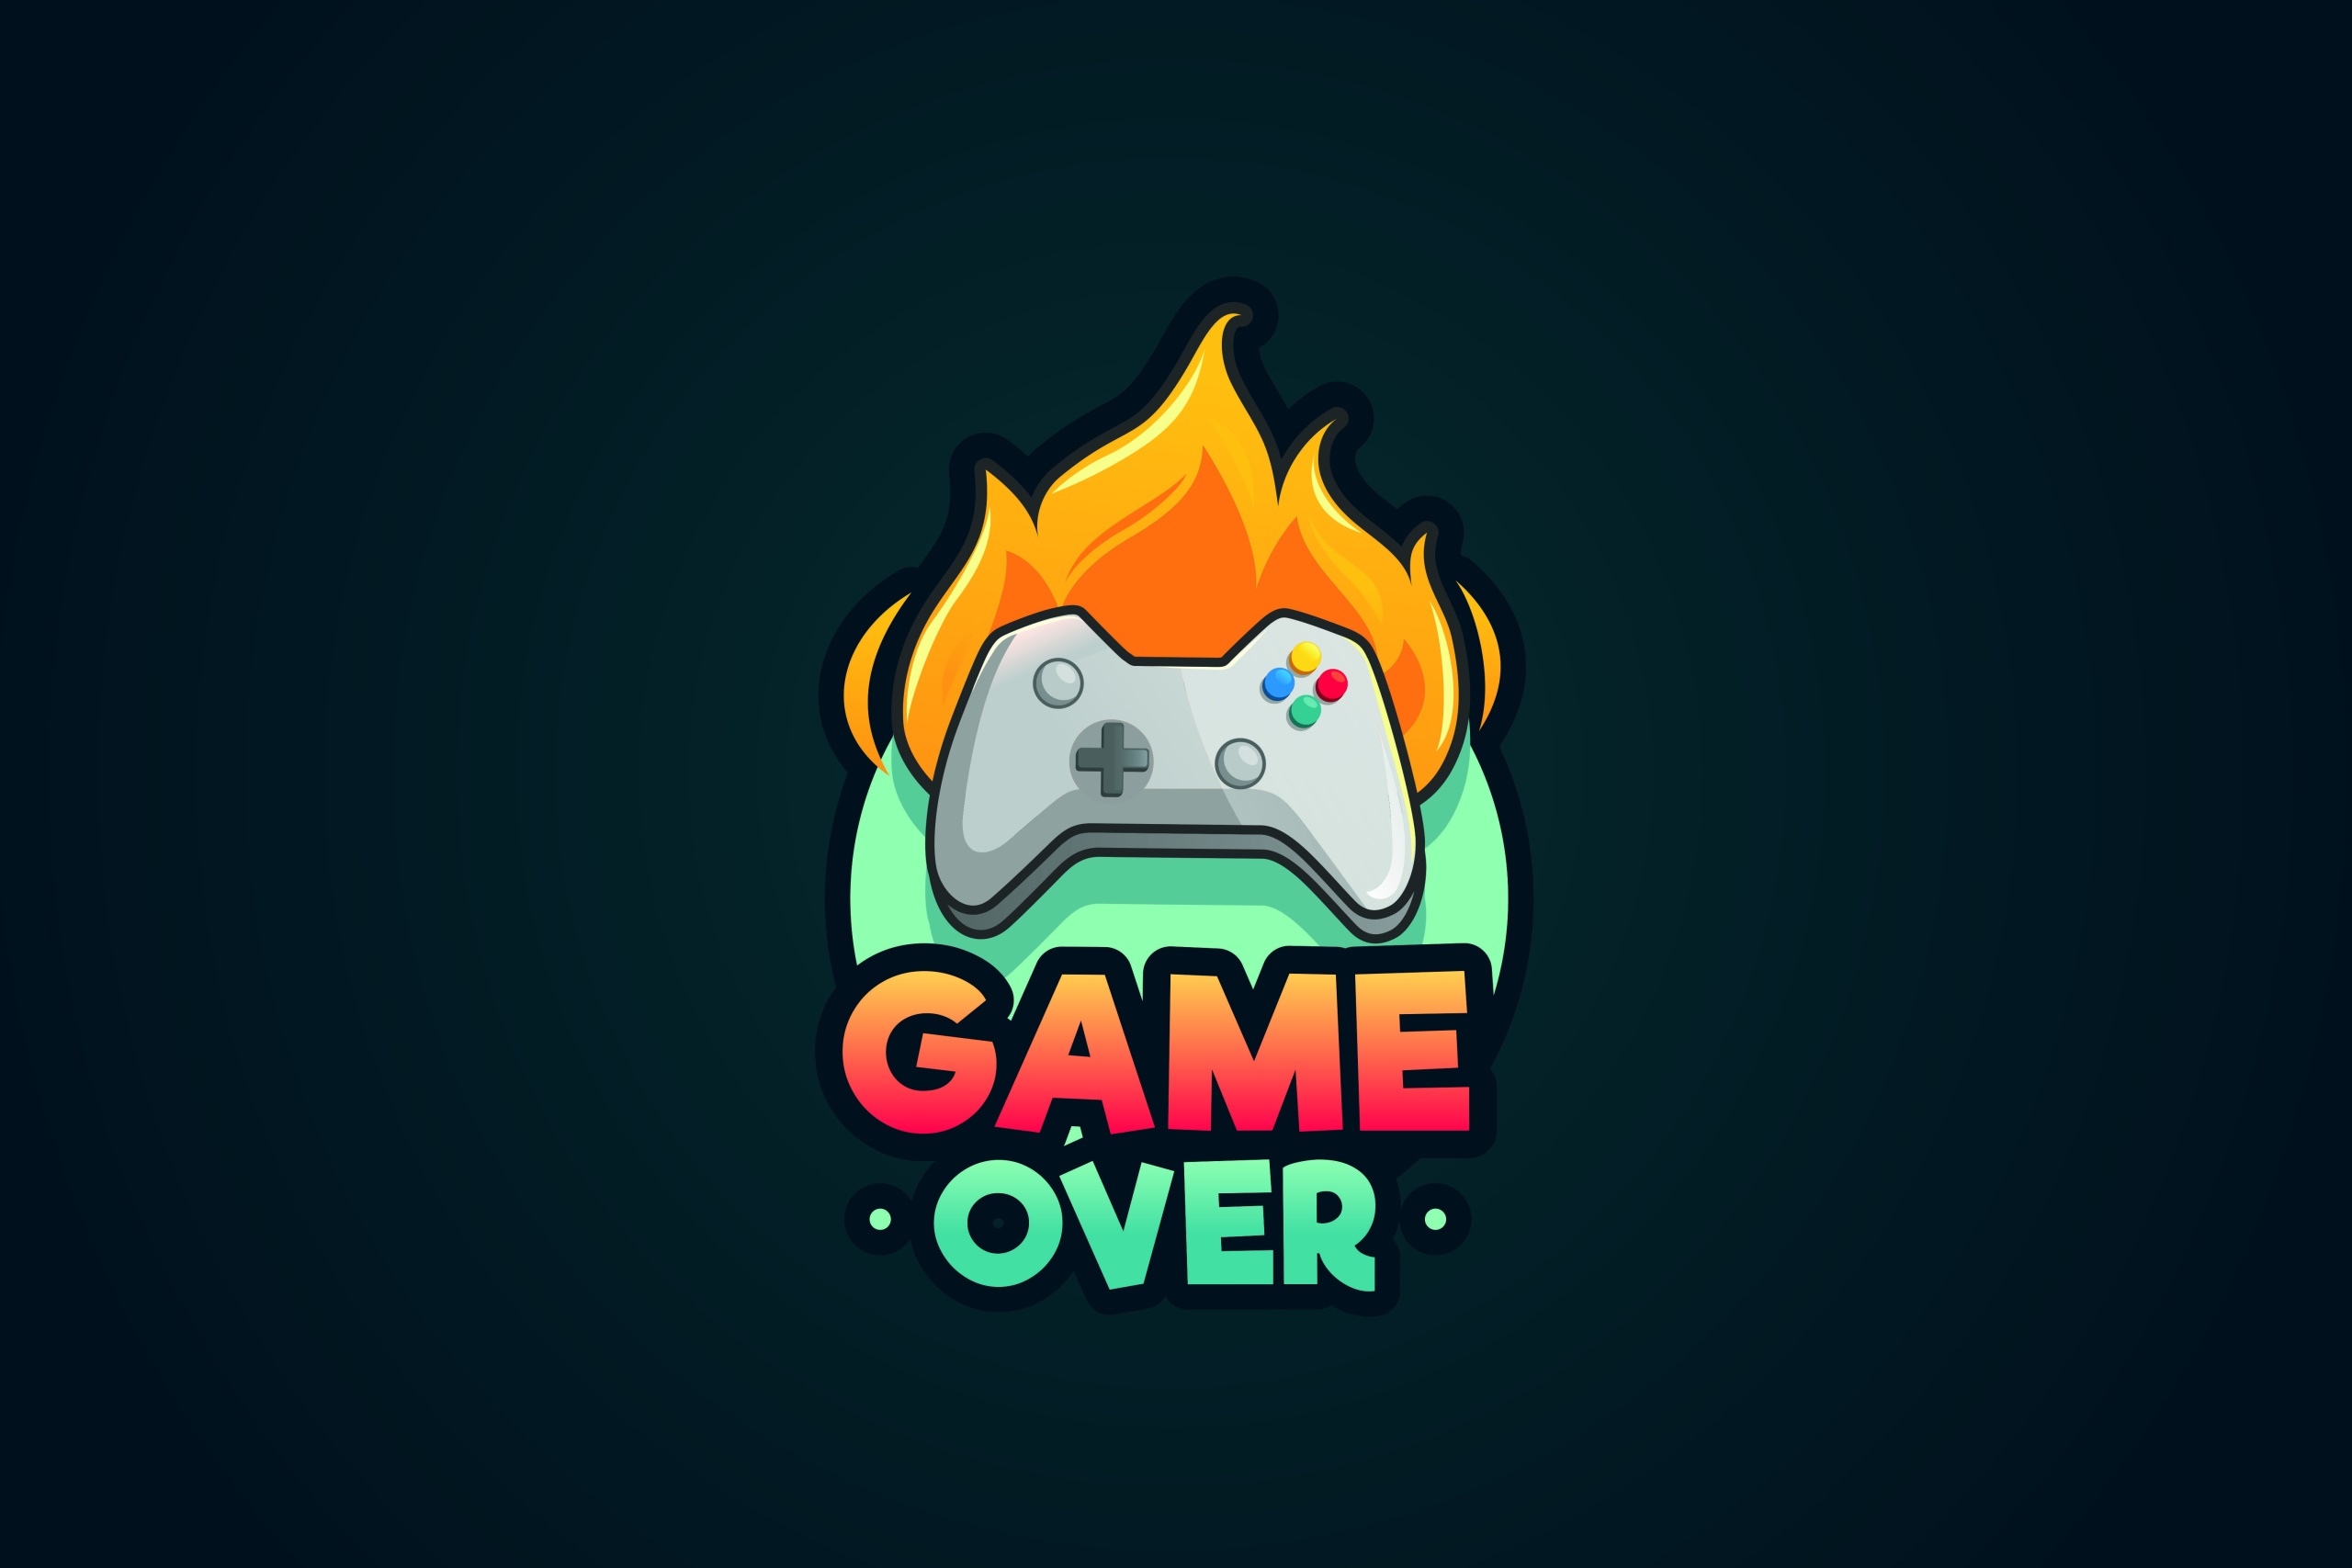 General 2560x1707 GAME OVER minimalism controllers simple background video games